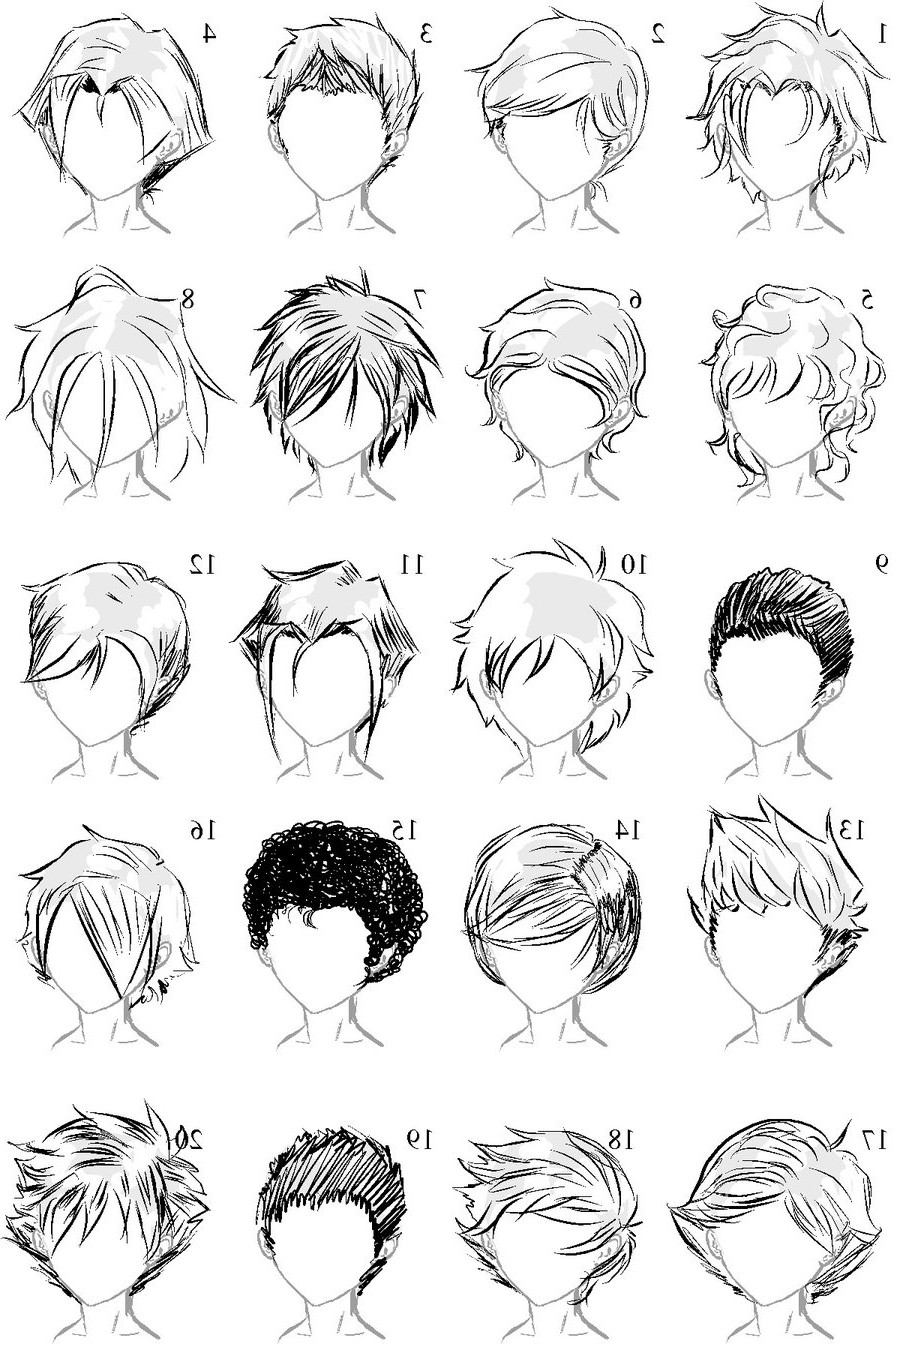 Draw Anime Hairstyles
 Male Anime Hairstyles Drawing at PaintingValley